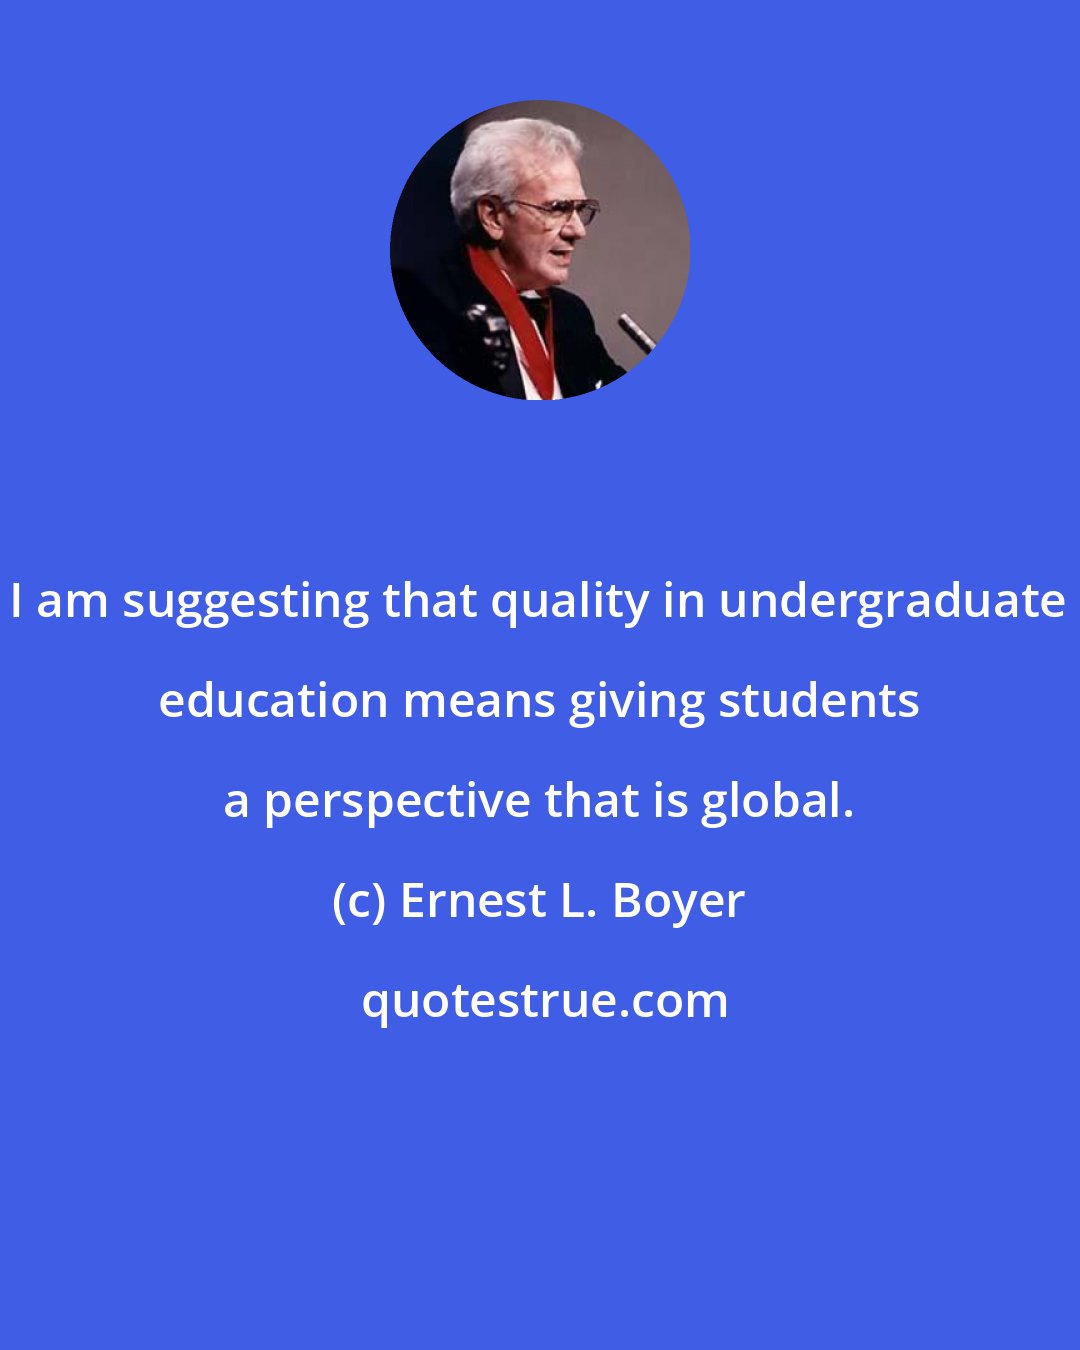 Ernest L. Boyer: I am suggesting that quality in undergraduate education means giving students a perspective that is global.